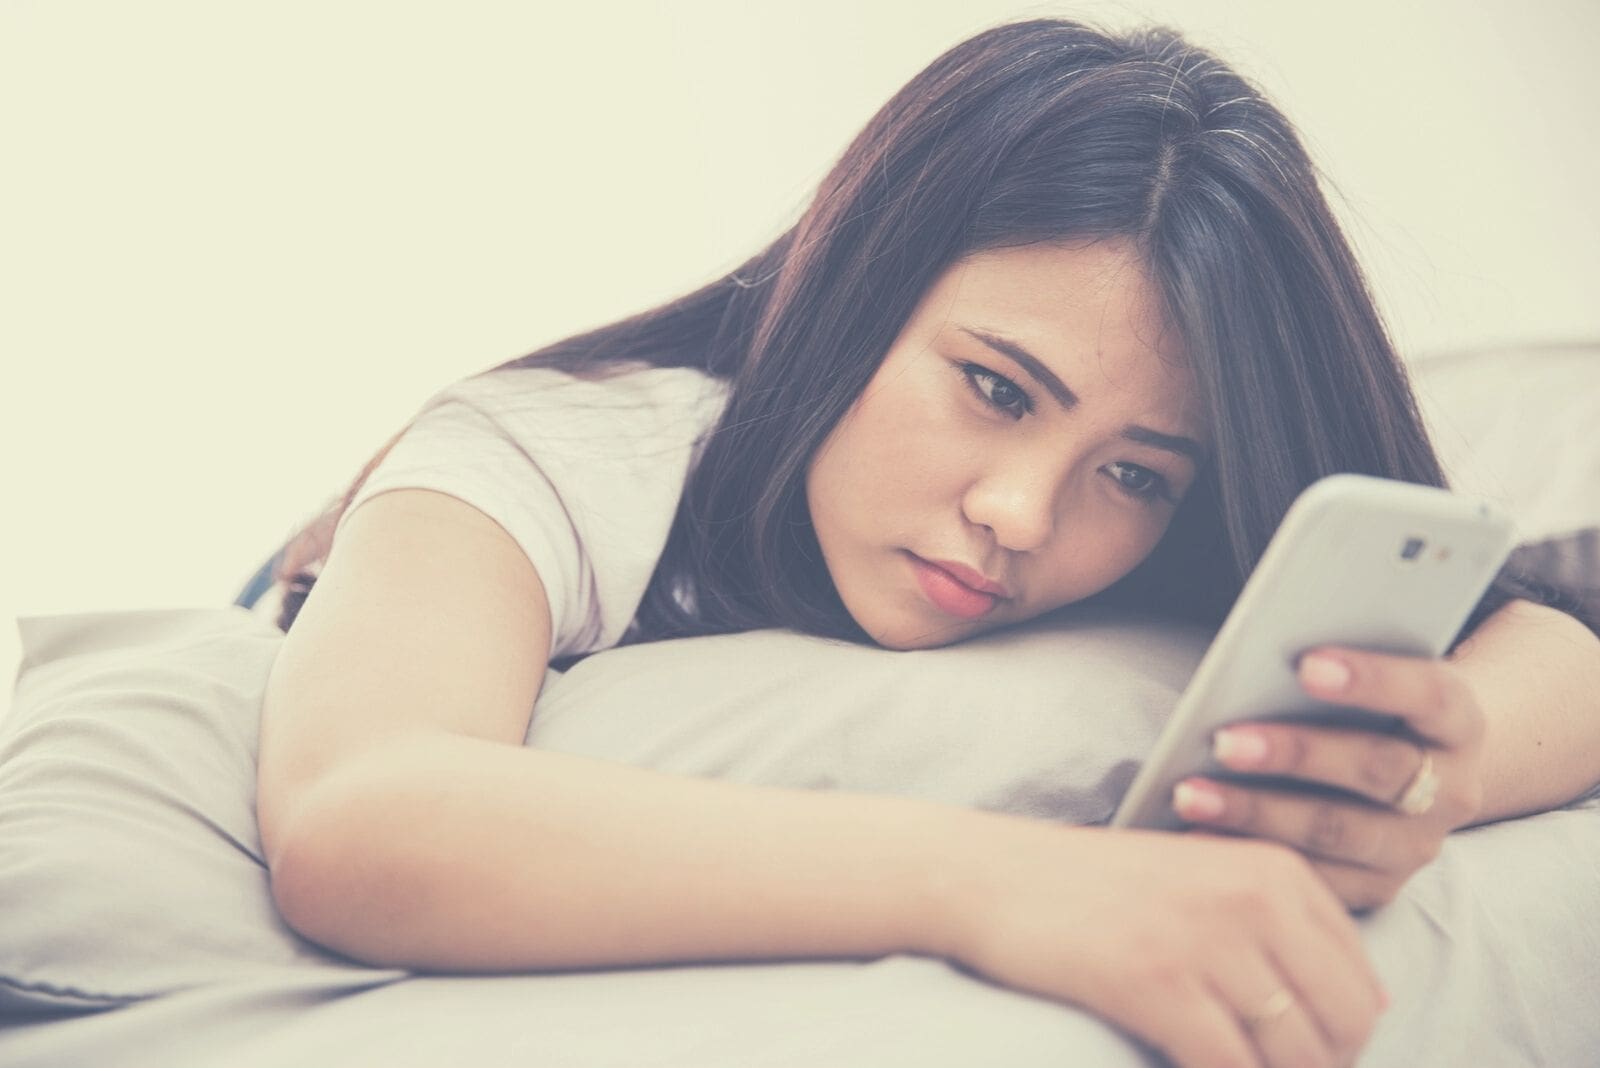 sad woman looking at phone and lying down leaning on the pillow